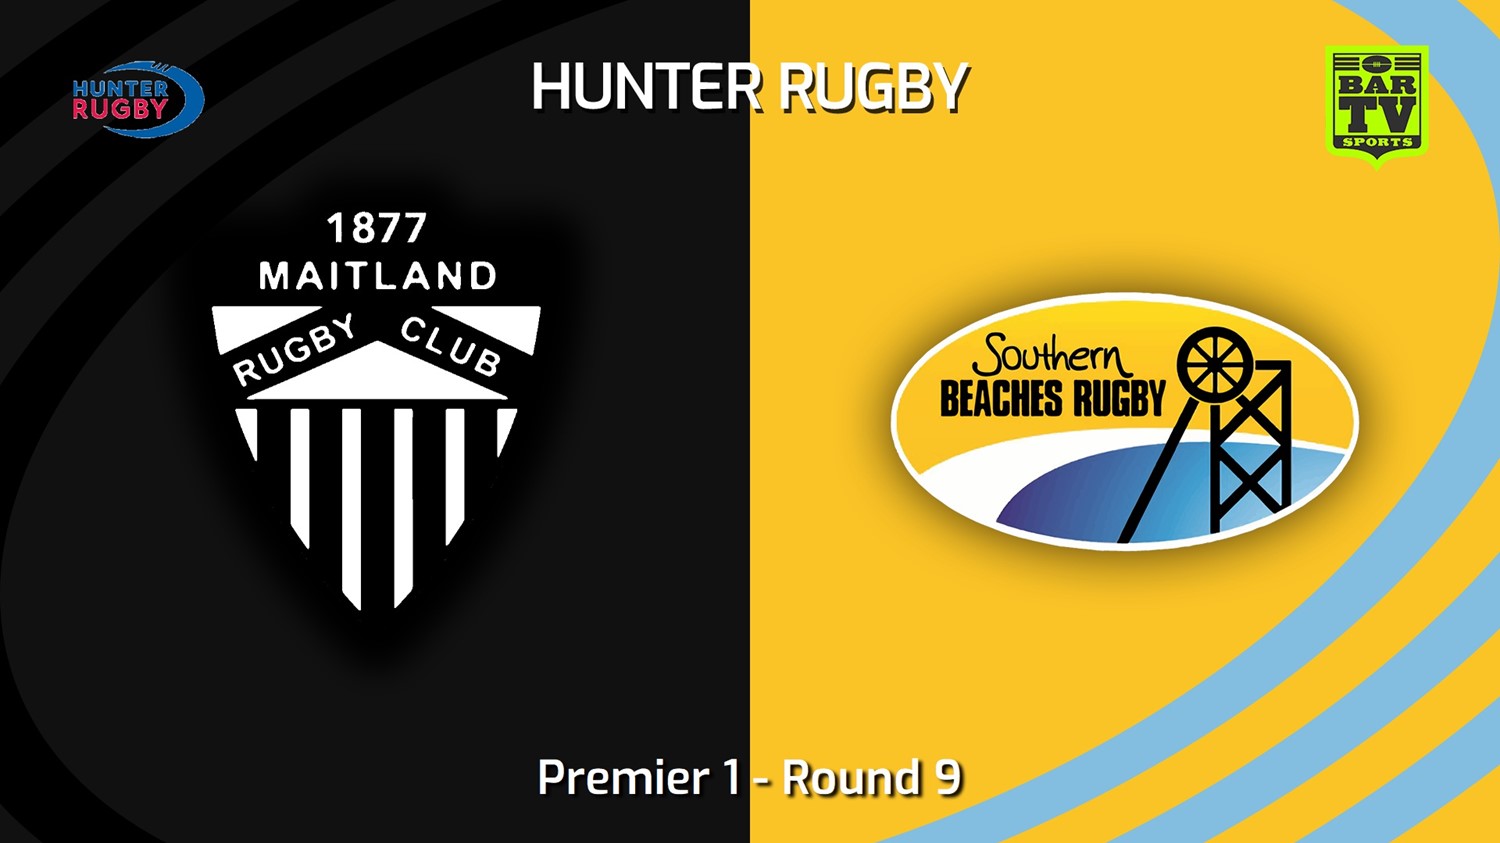 240615-video-Hunter Rugby Round 9 - Premier 1 - Maitland v Southern Beaches Minigame Slate Image